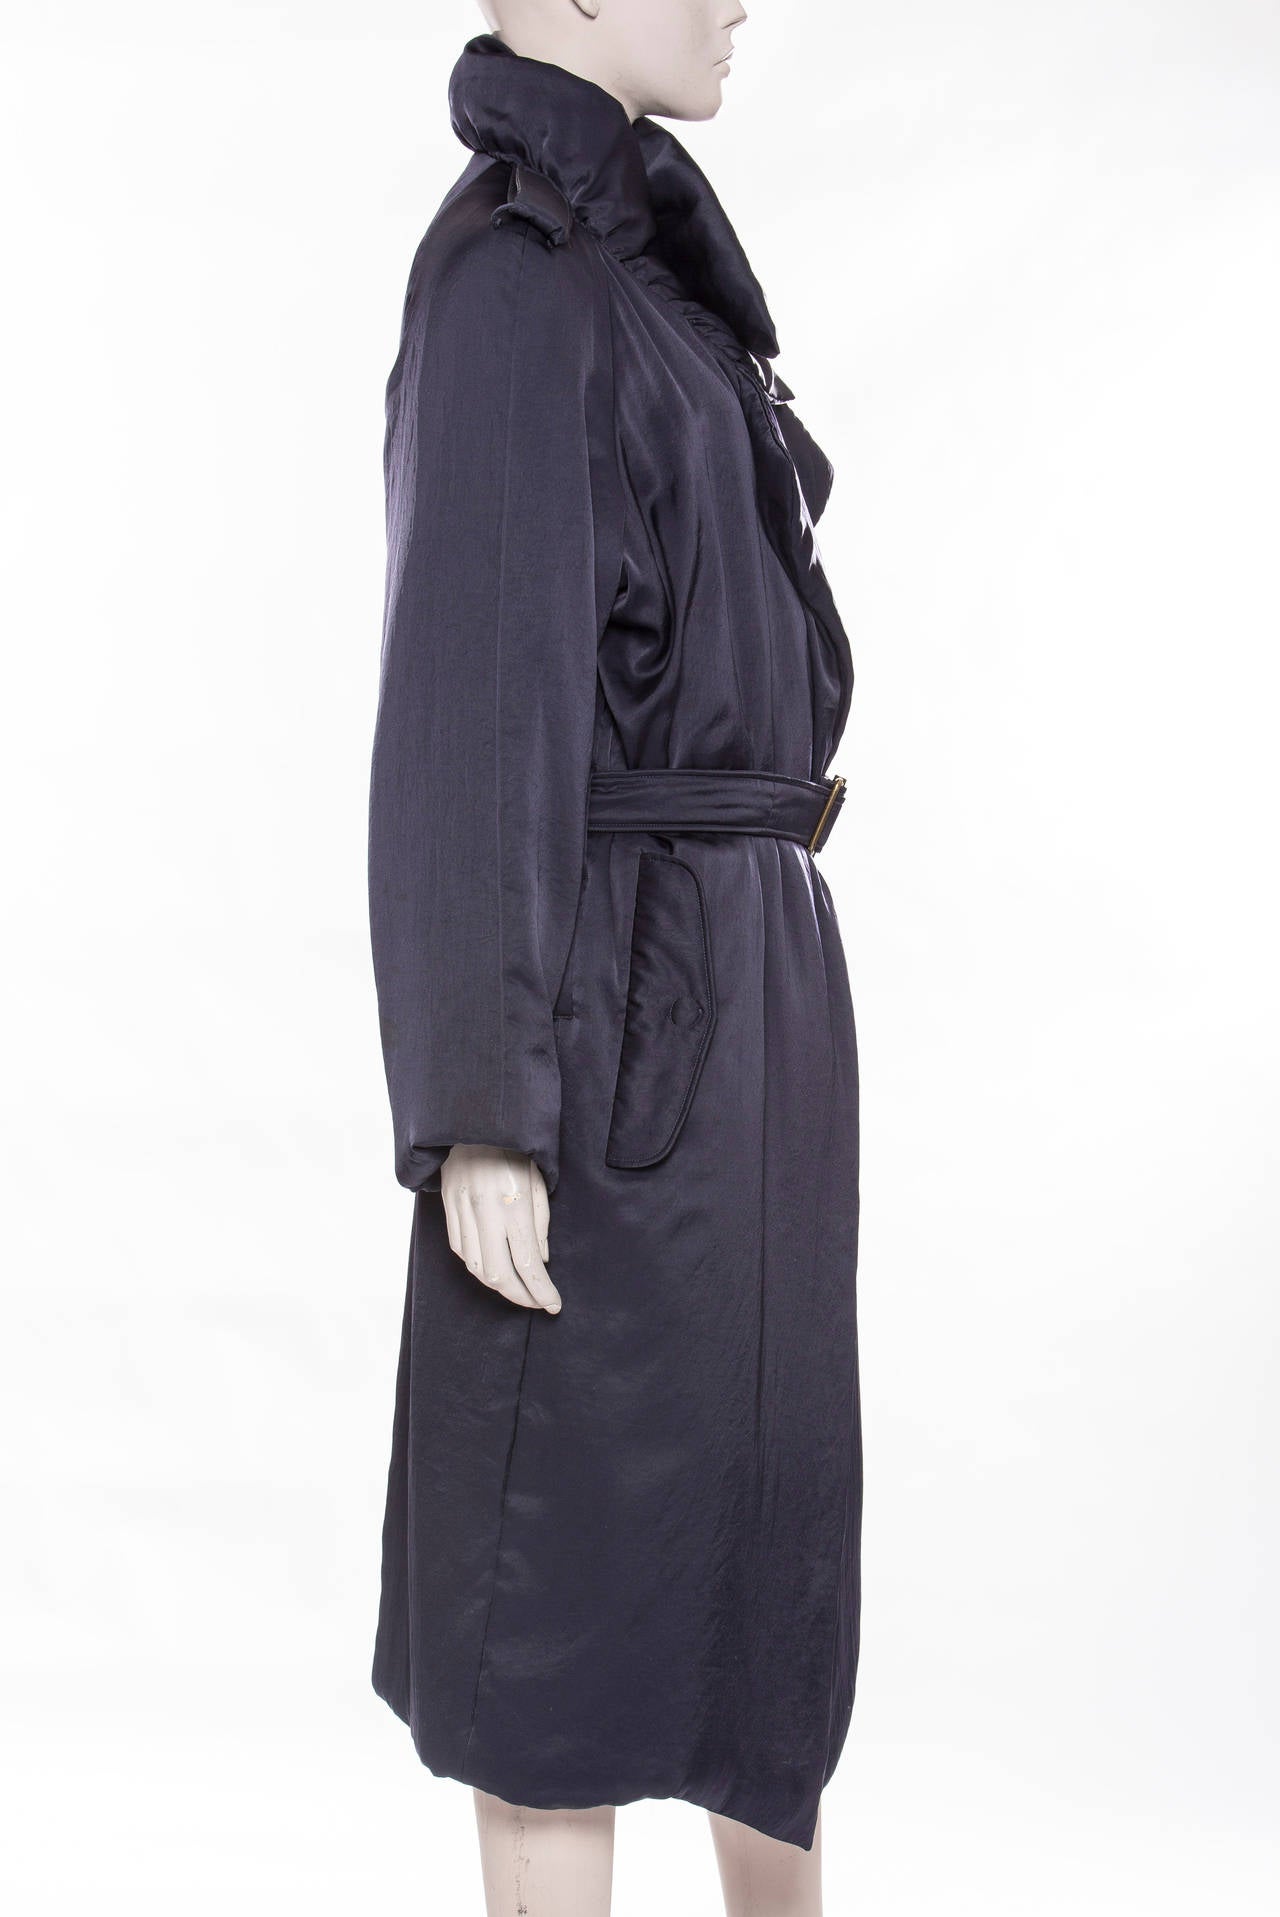 Lanvin, Fall 2006 midnight blue coat with flap pockets, notch collar and belt at waist featuring buckle closure.

EU. 42, US. 10

Bust 46", Waist 40", Shoulder 17", Length 36"
Fabric Content: 88% Triacetate, 12% Polyester